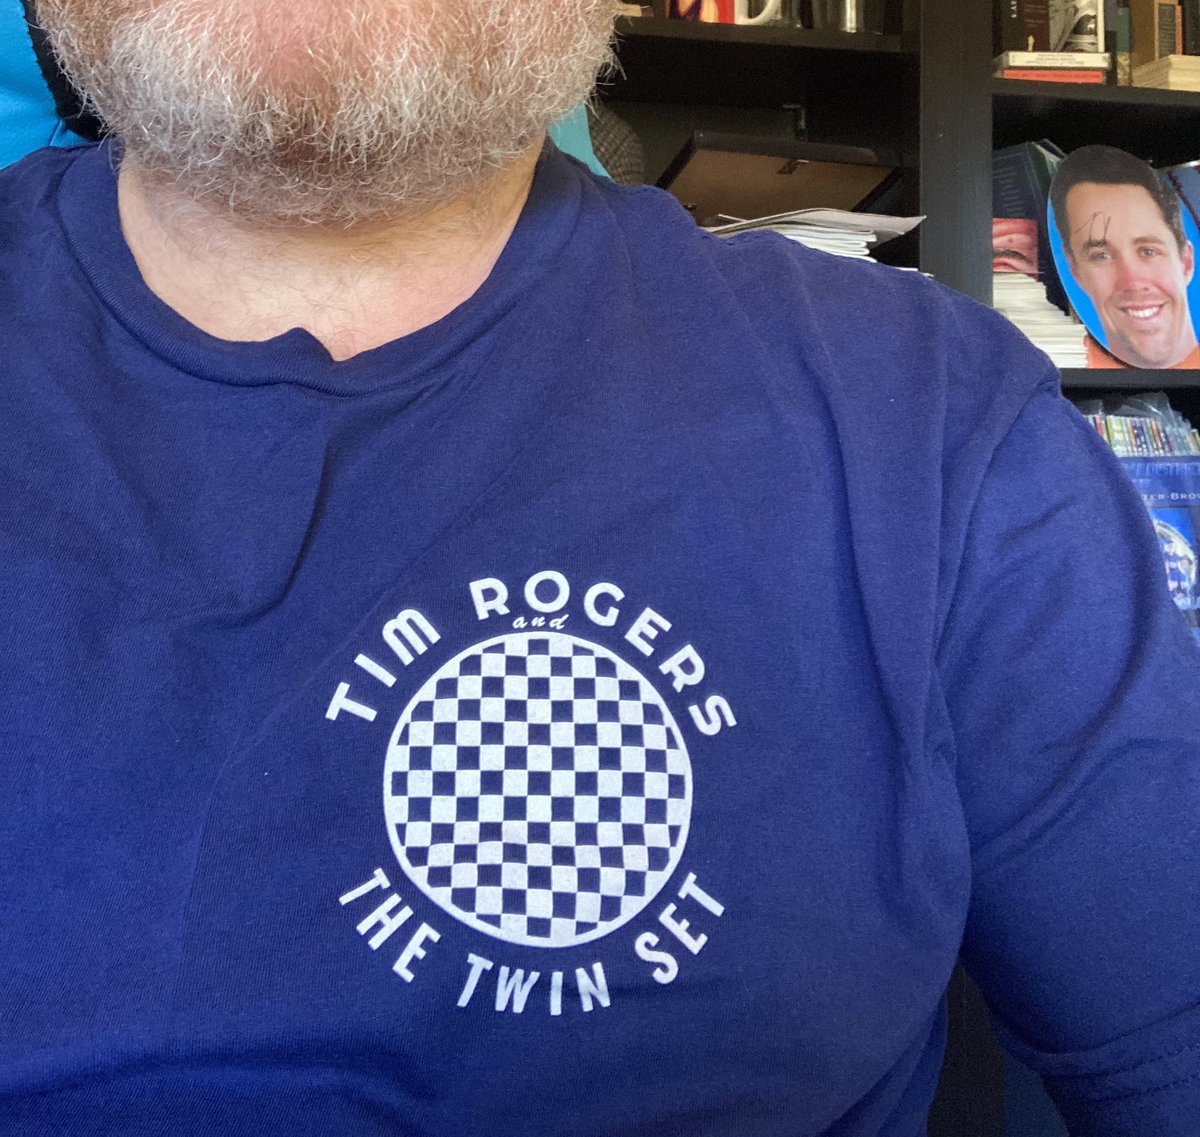 Spose I should join in the #ausmusictshirtday fun